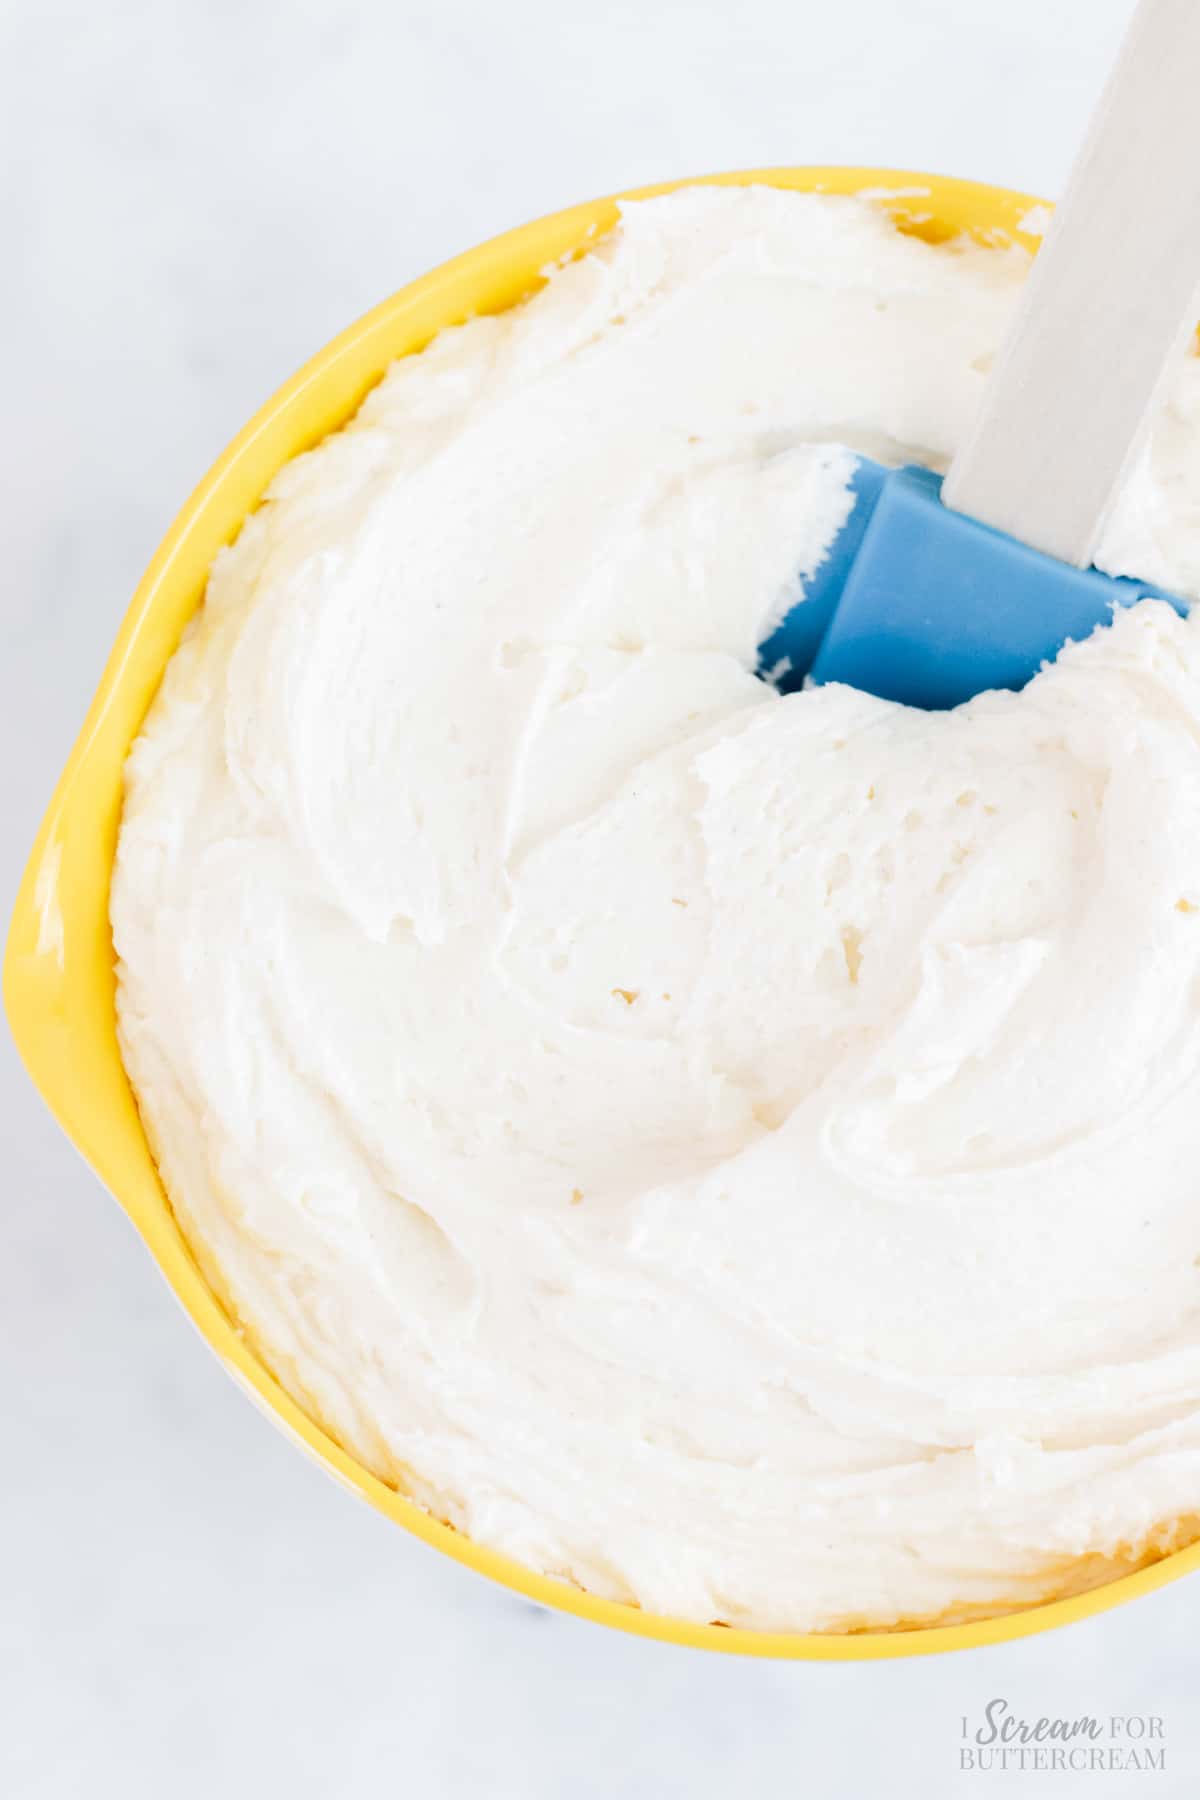 Vanilla buttercream frosting in a yellow bowl with a blue spatula.